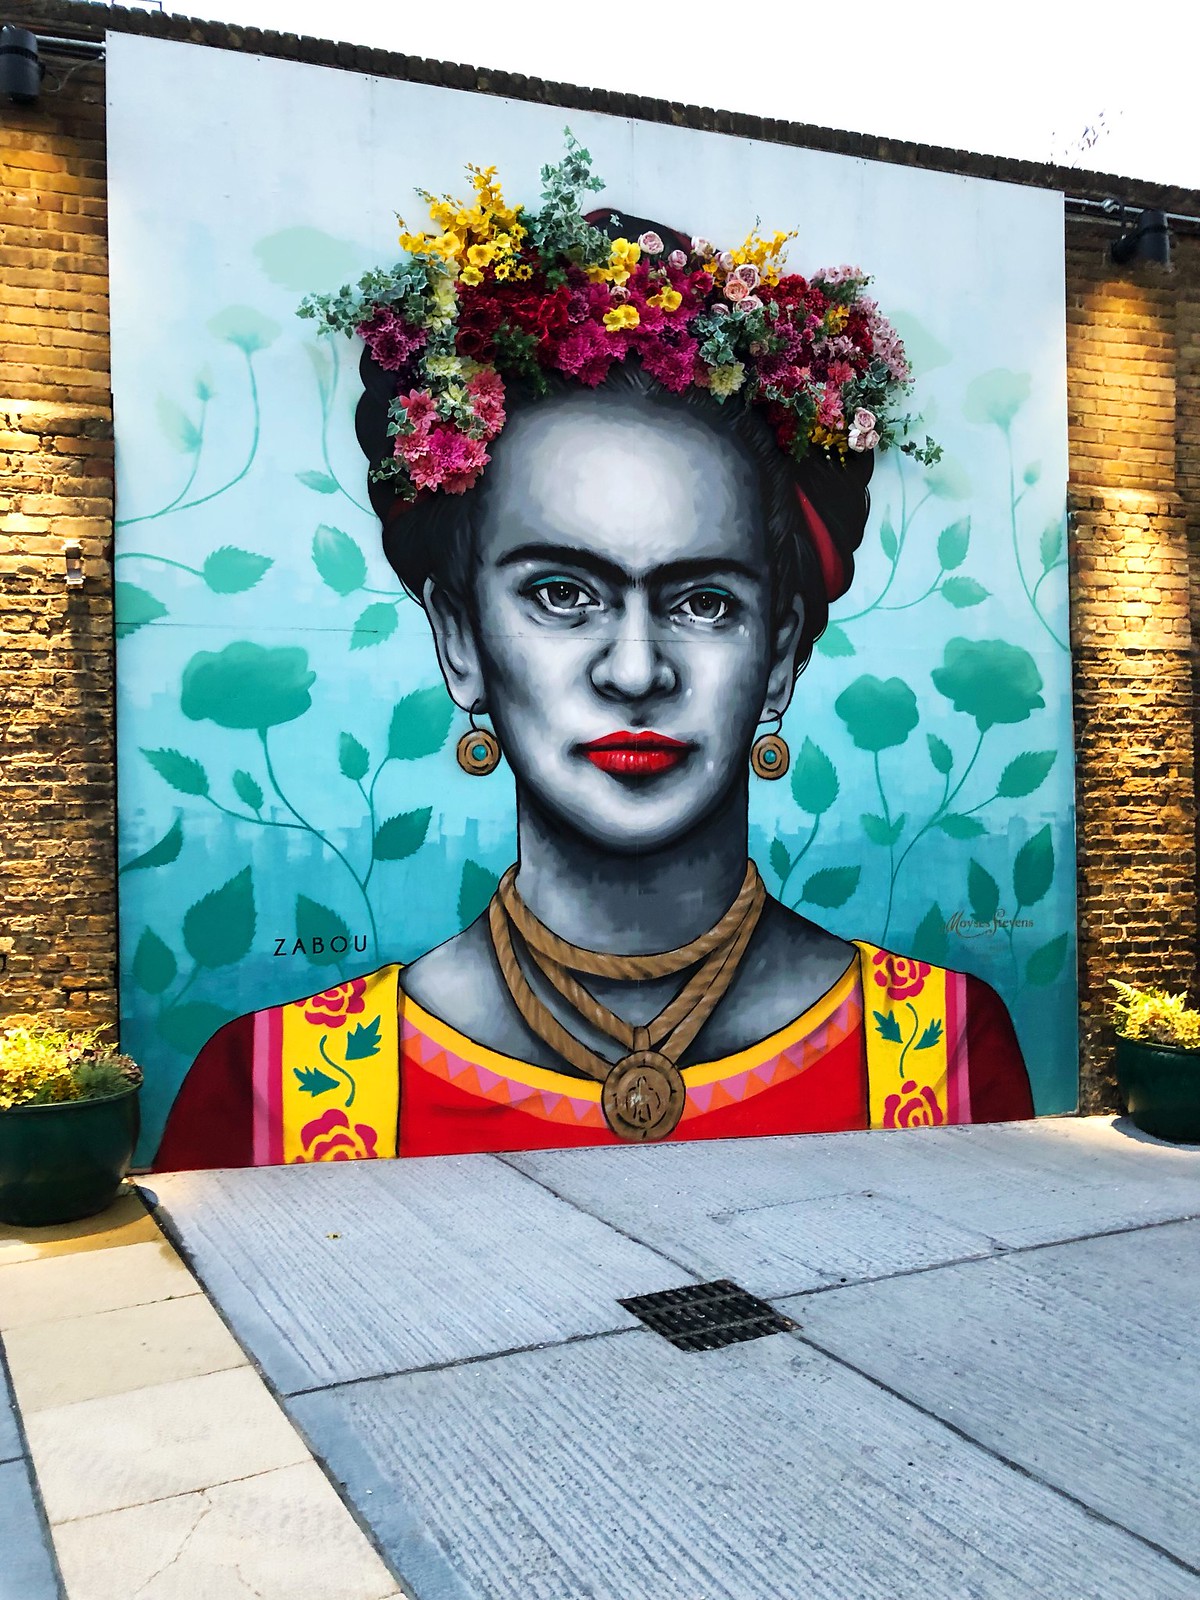 A Day Out in London for Adults: Belgravia (Eccleston Yards, Frida Kahlo mural) | Not Dressed As Lamb, a blog for over 40 women